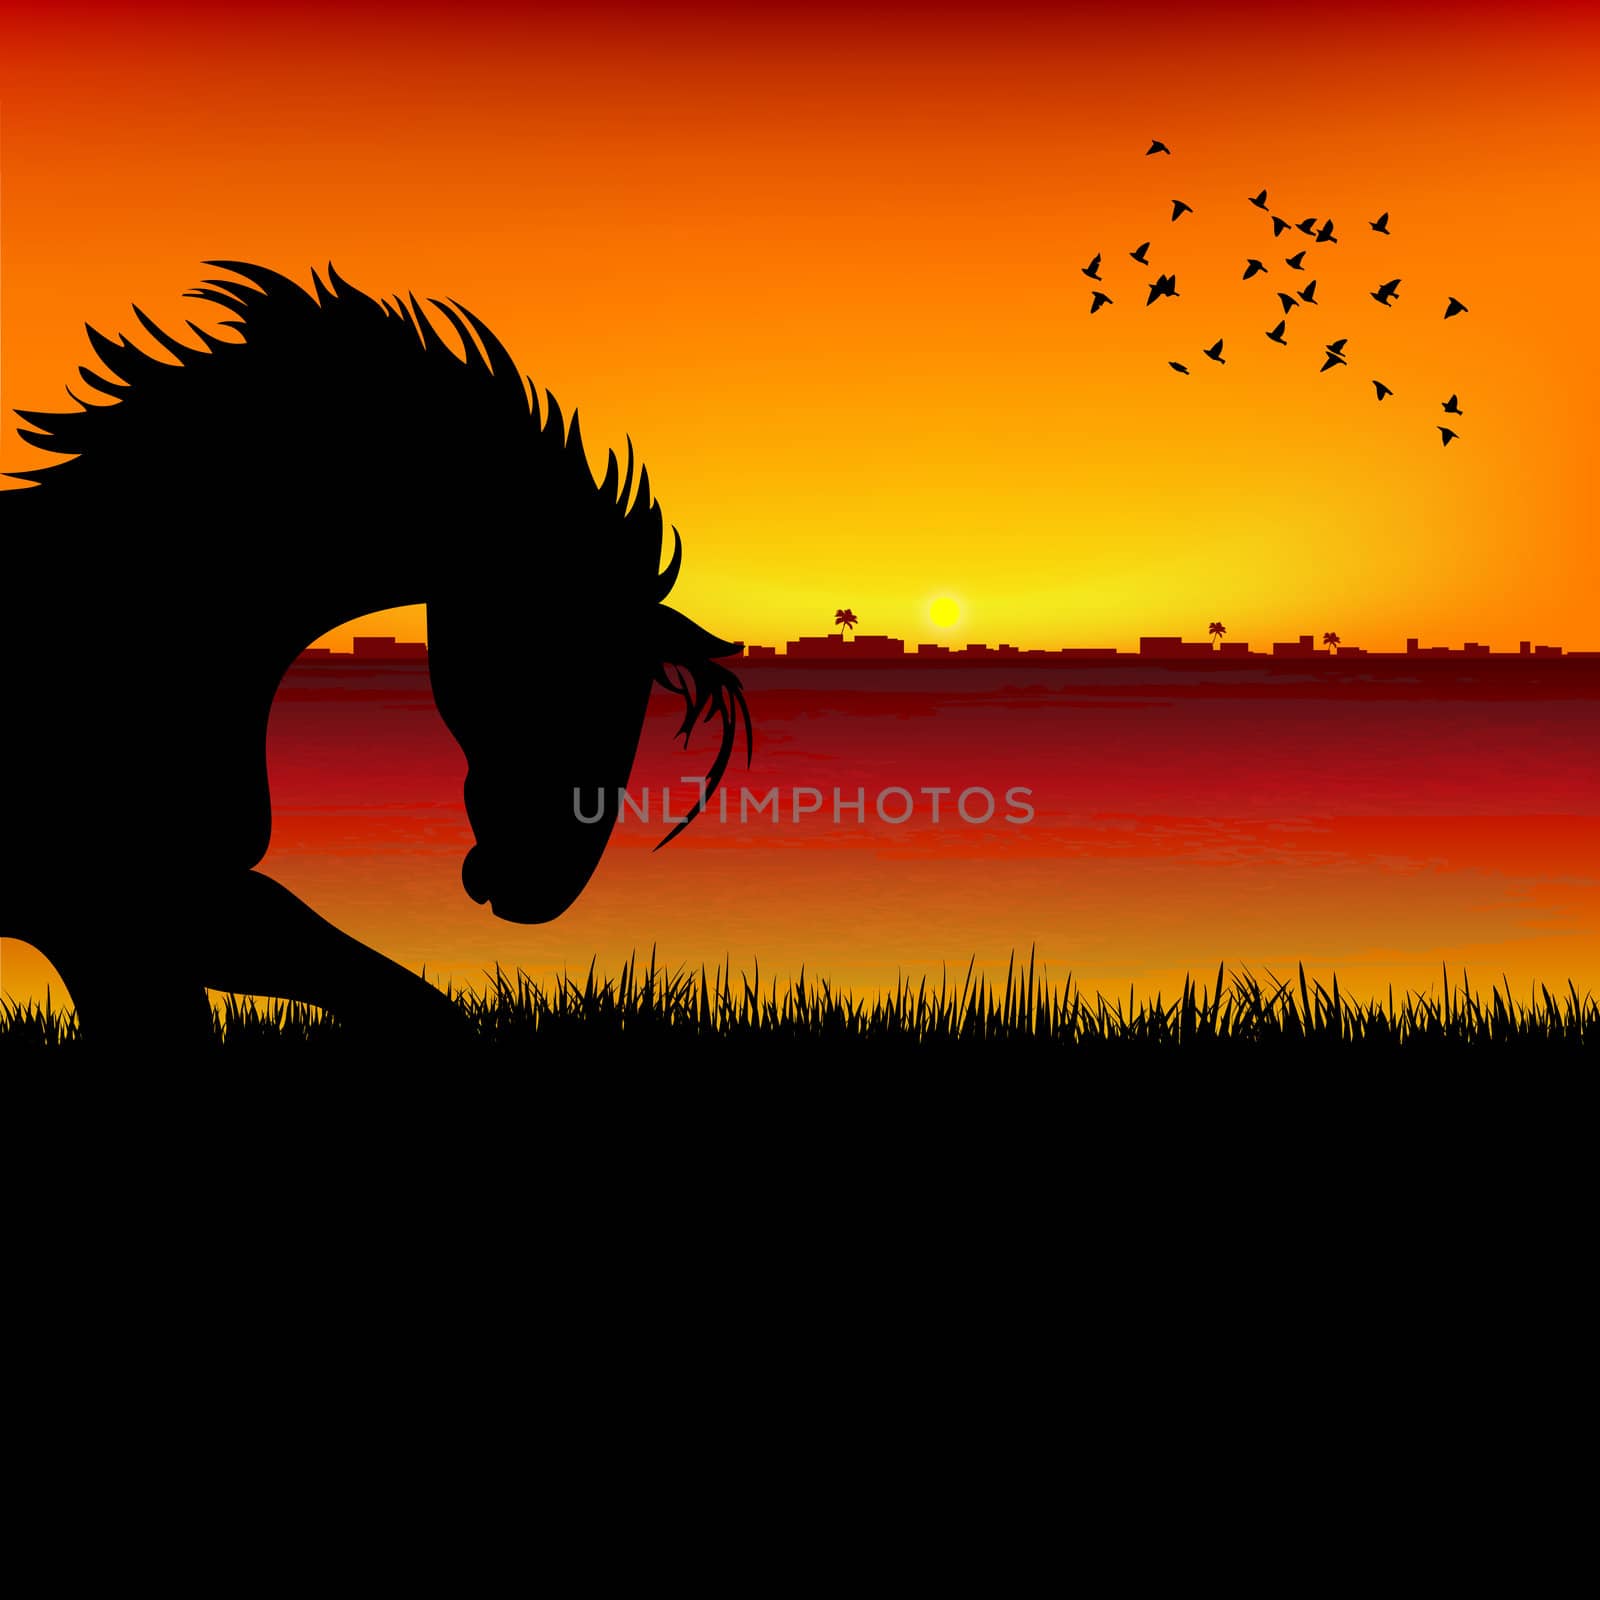 silhouette view of a horse, sunset background by abhishek4383